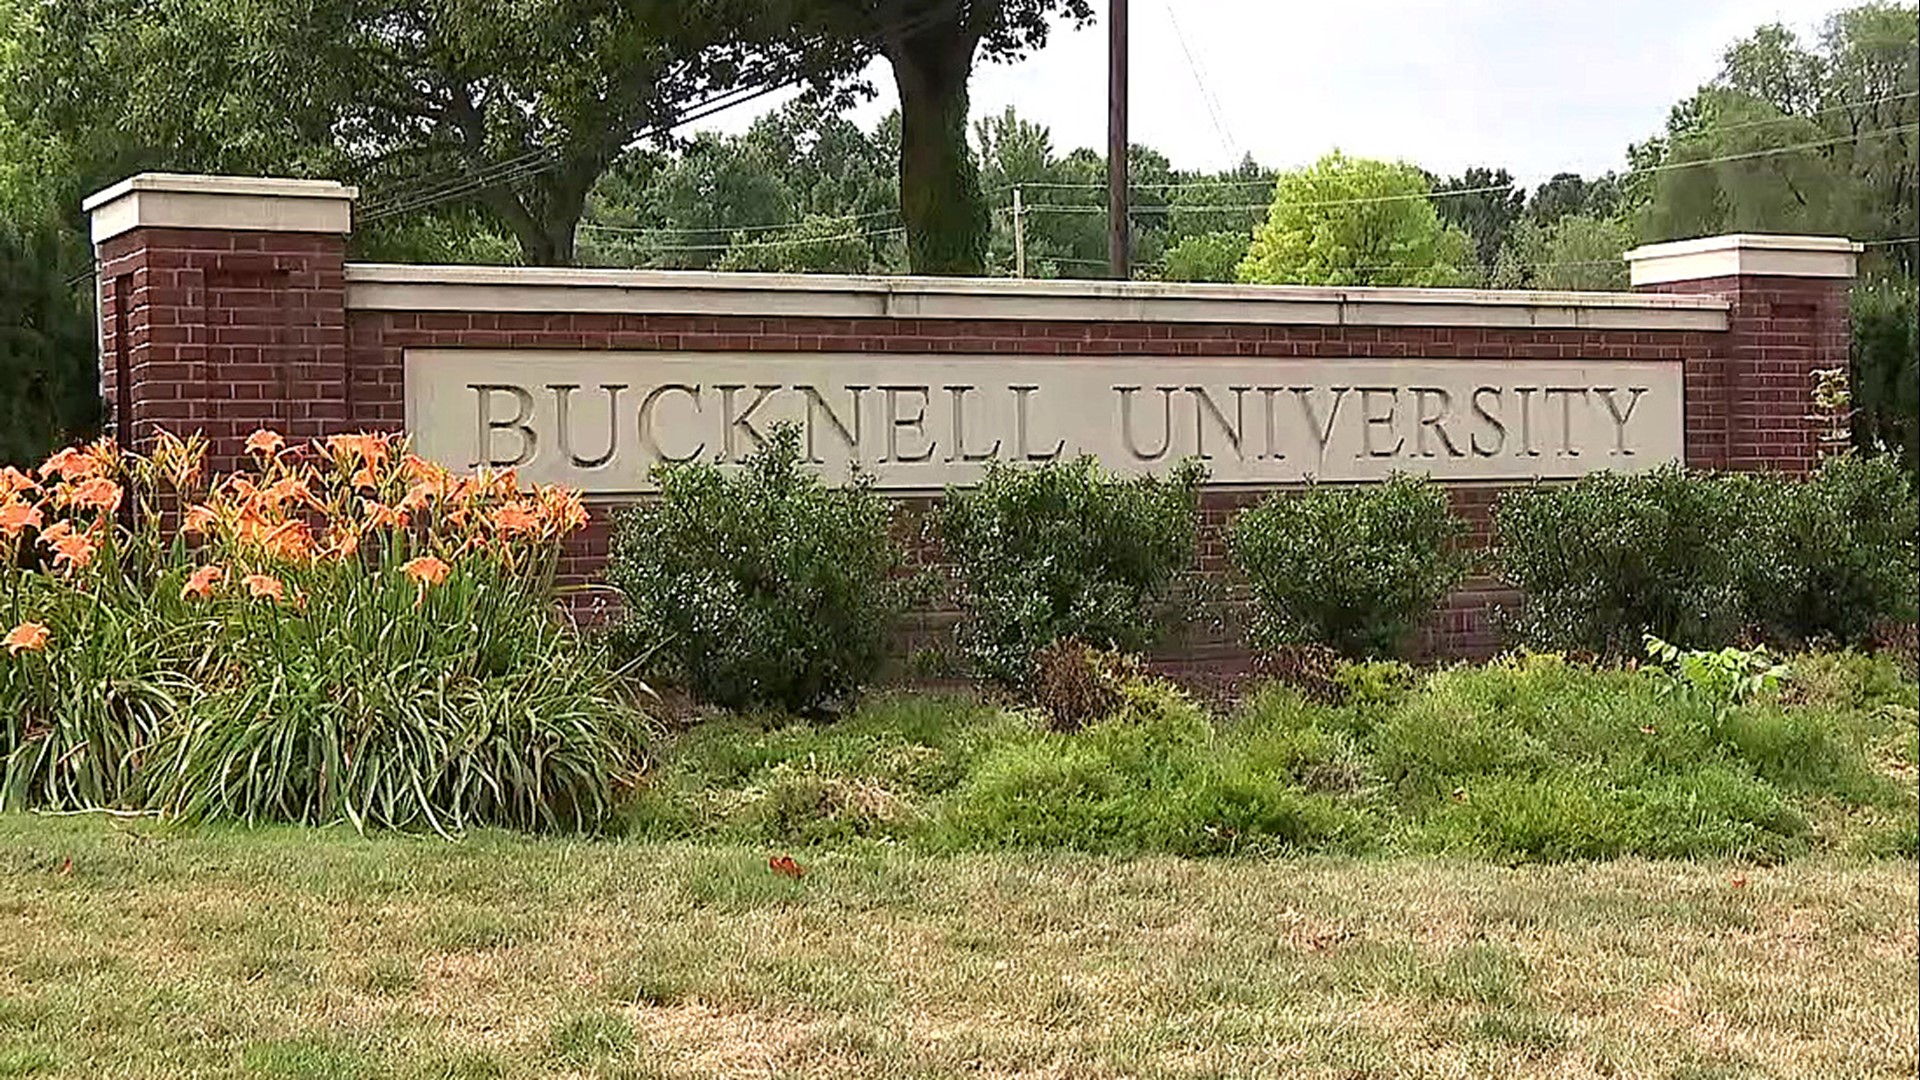 Bucknell University officials announced that all students must be vaccinated before they return to campus in the fall.